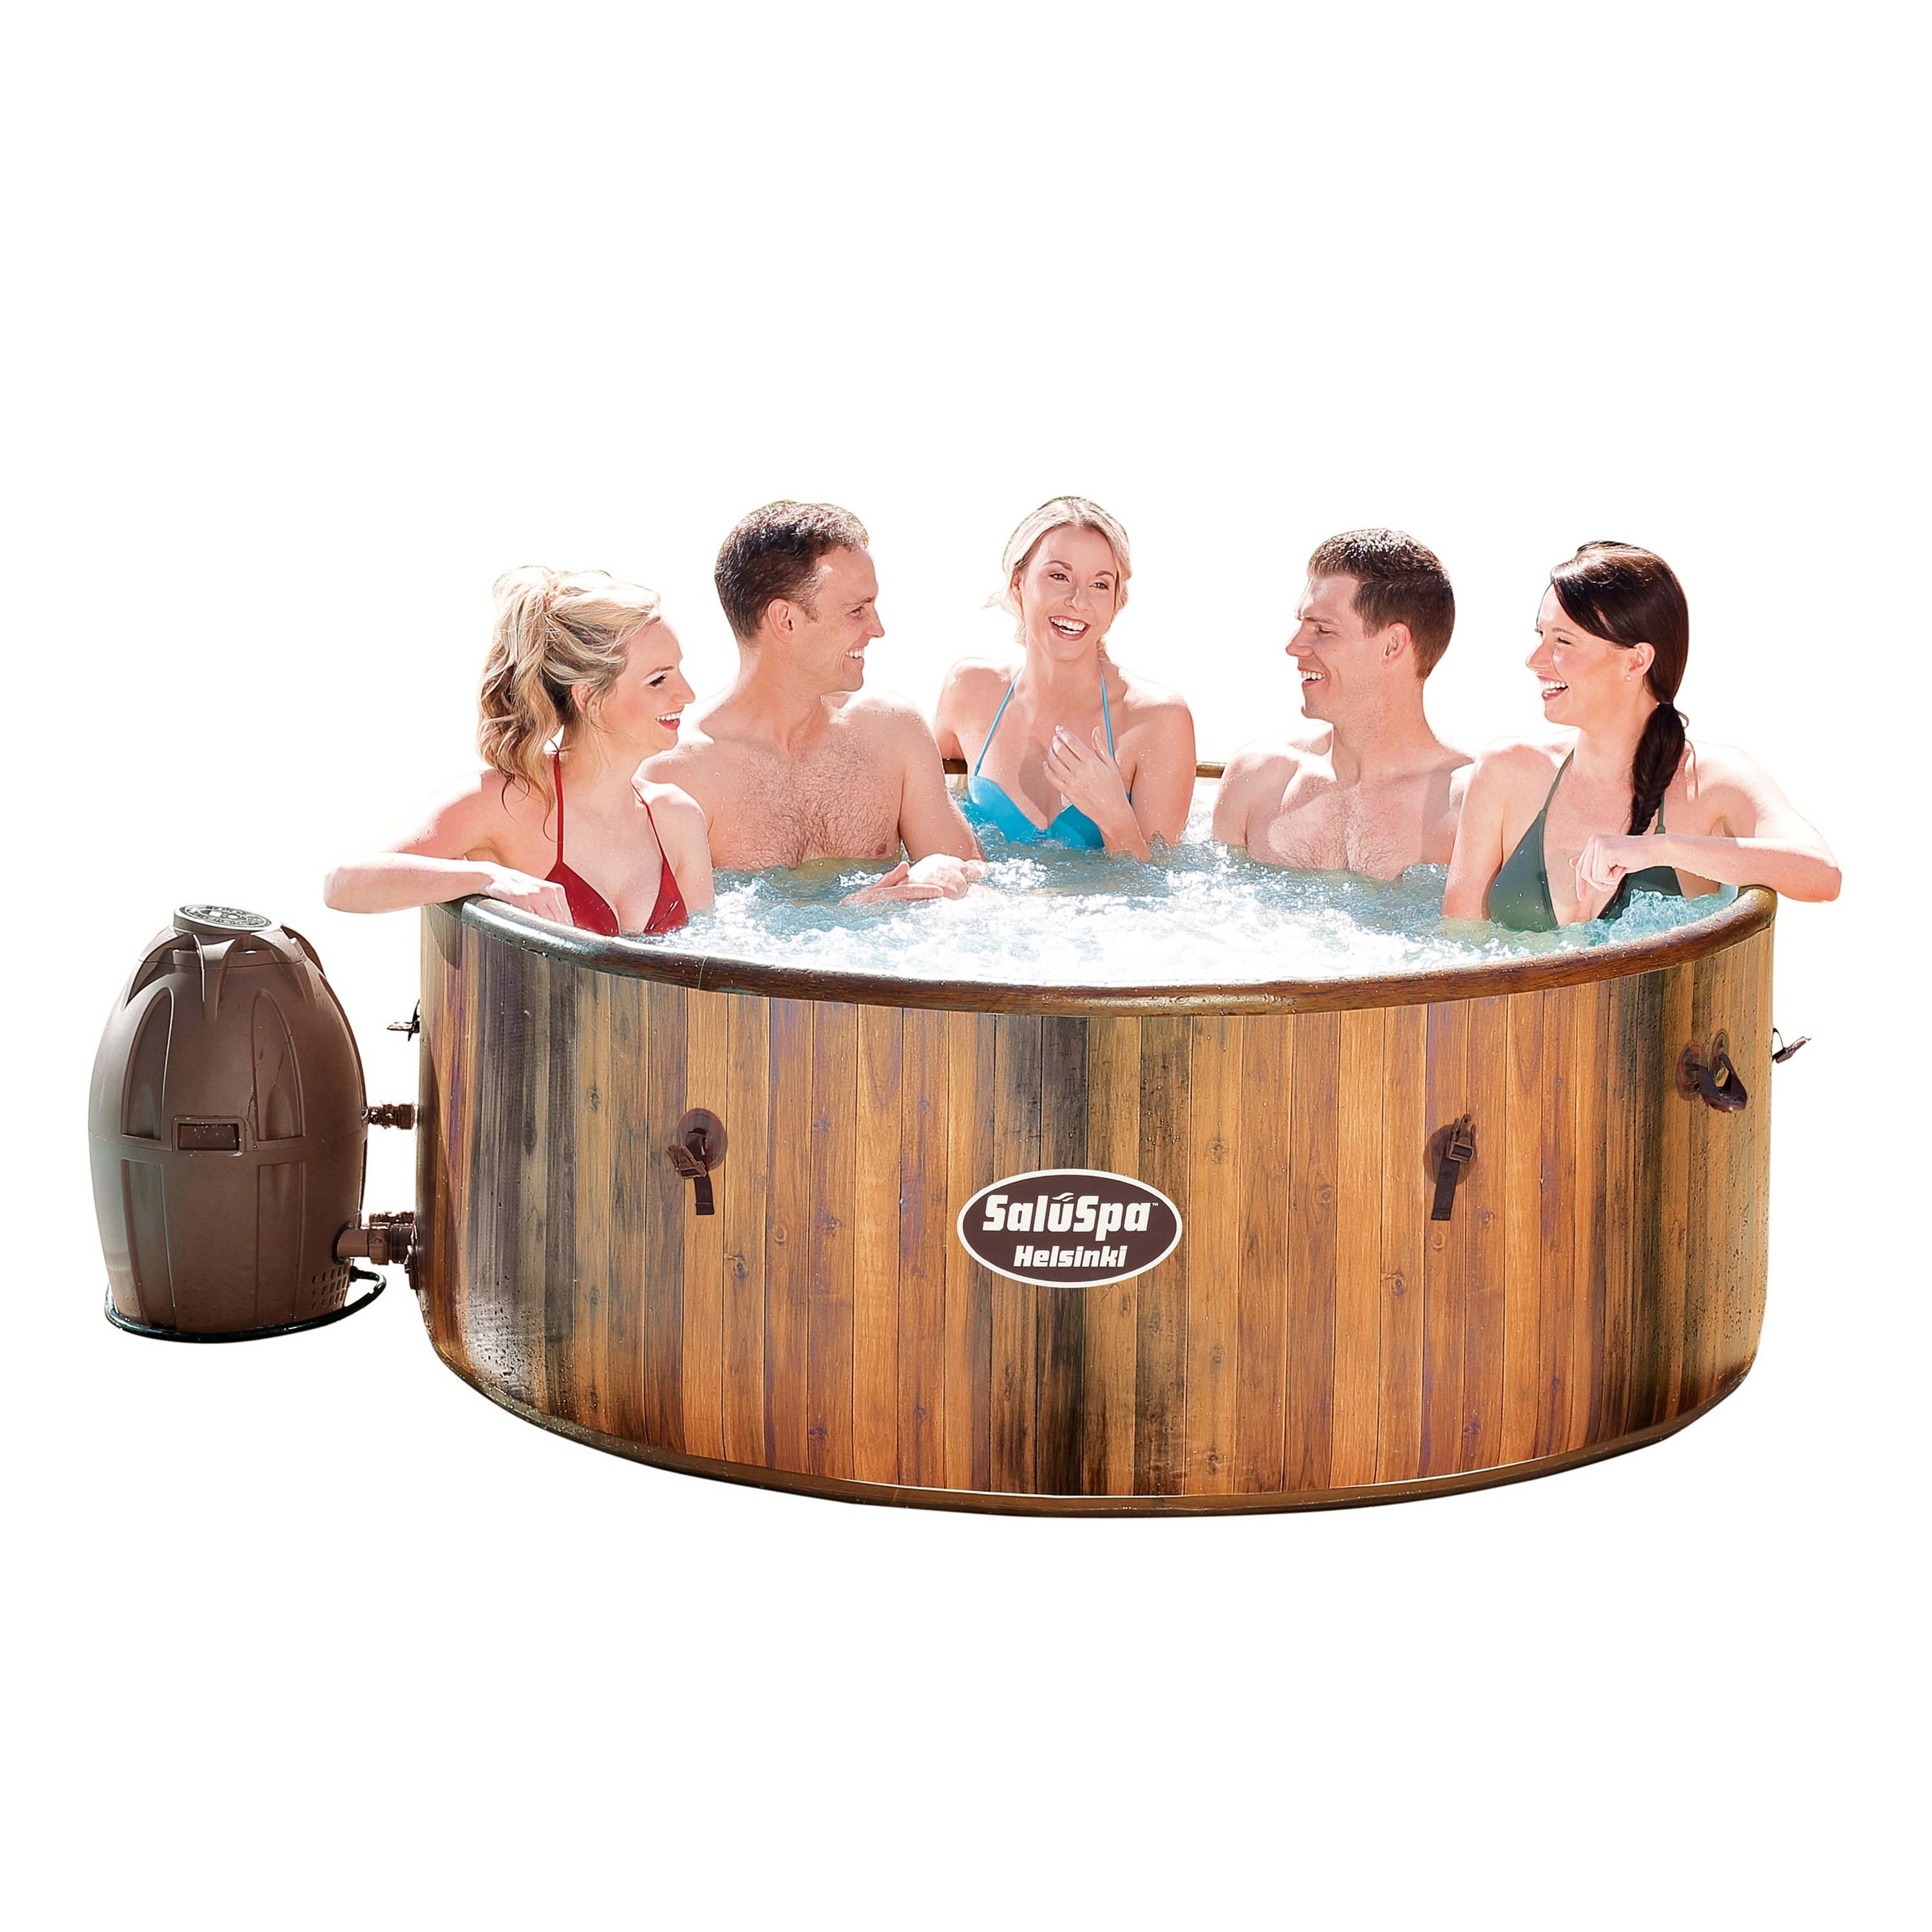 Bestway 54190E SaluSpa Helsinki AirJet 7 Person Inflatable Hot Tub Spa with Pump - image 1 of 12